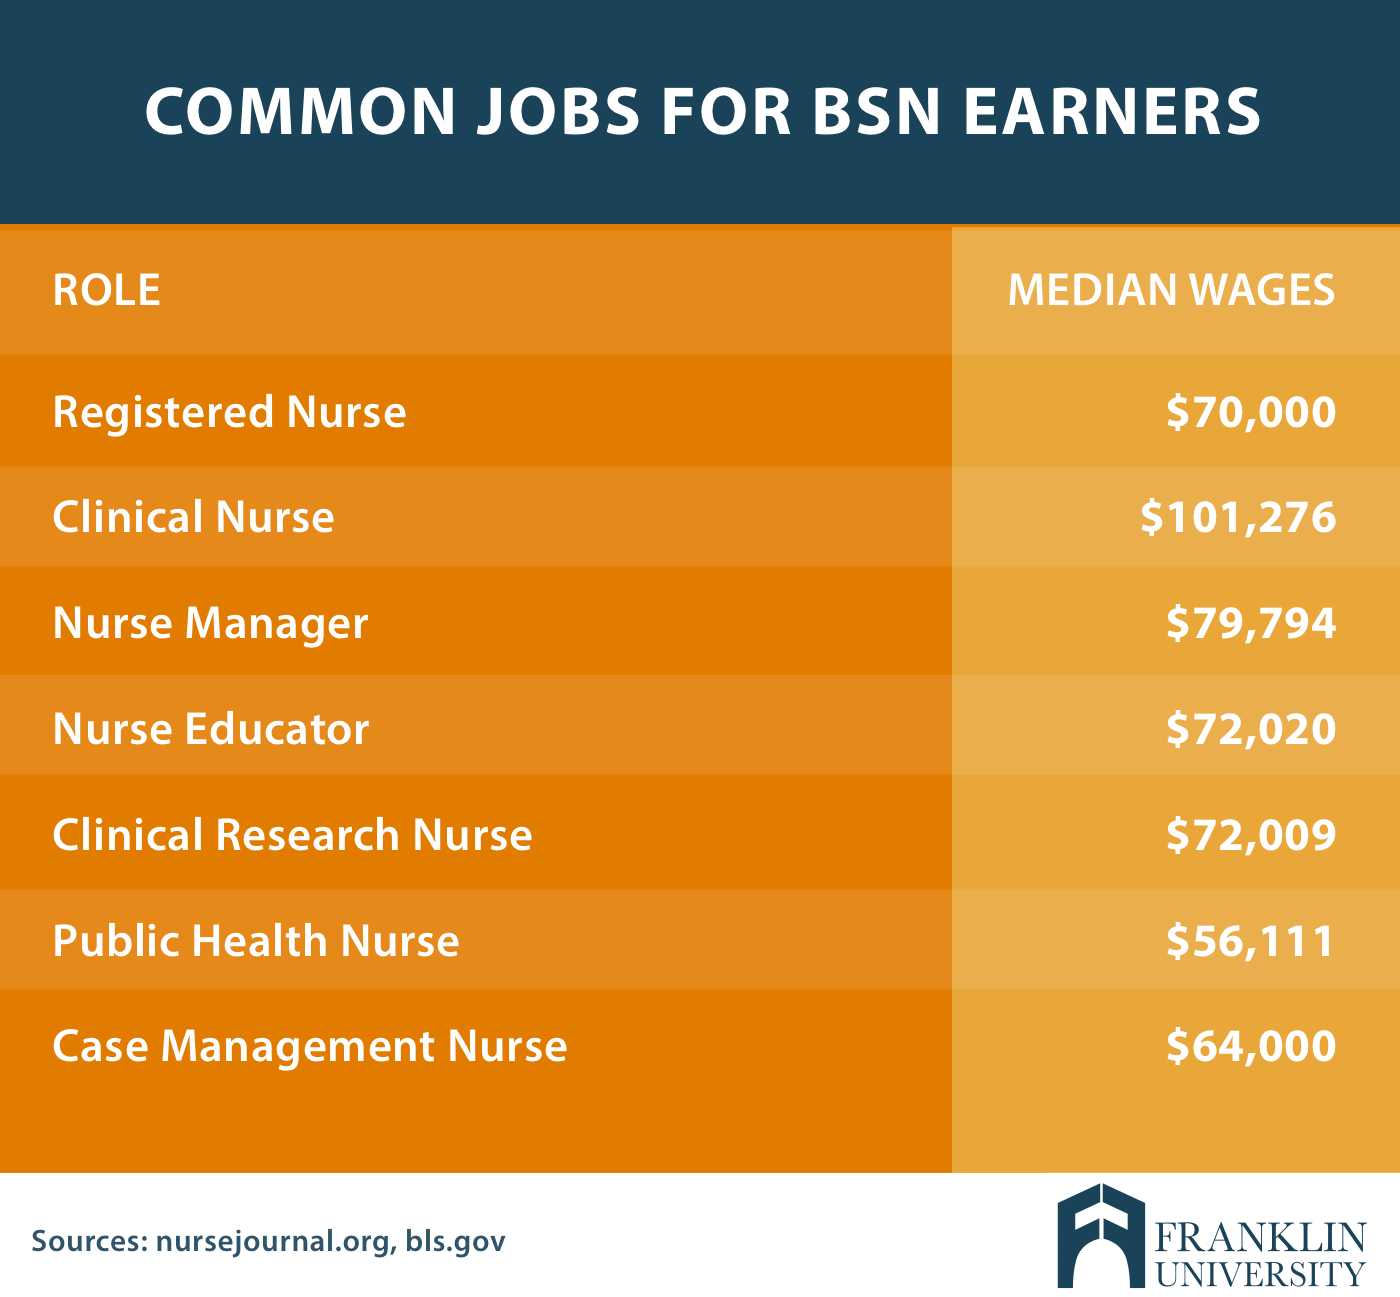 graphic describes common jobs for BSN earners